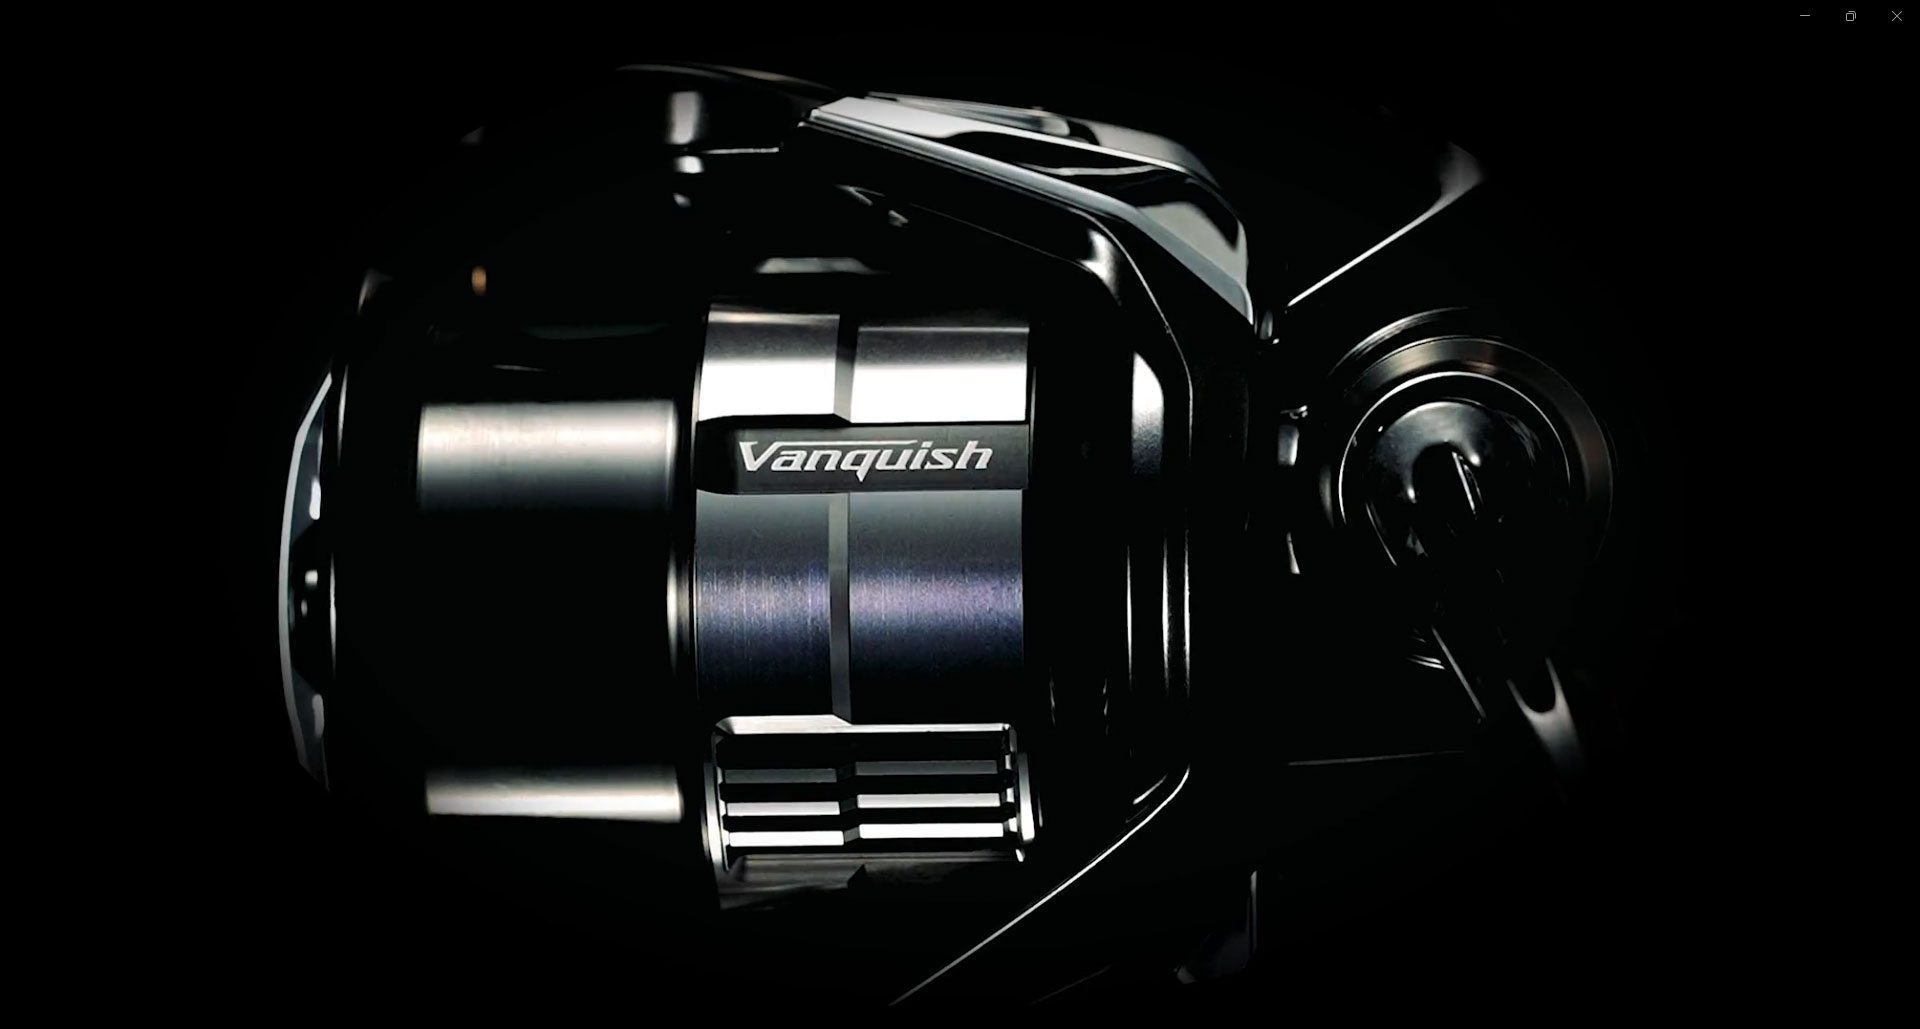 New SHIMANO 23 Vanquish is Out with Full Of Features from 22 STELLA!